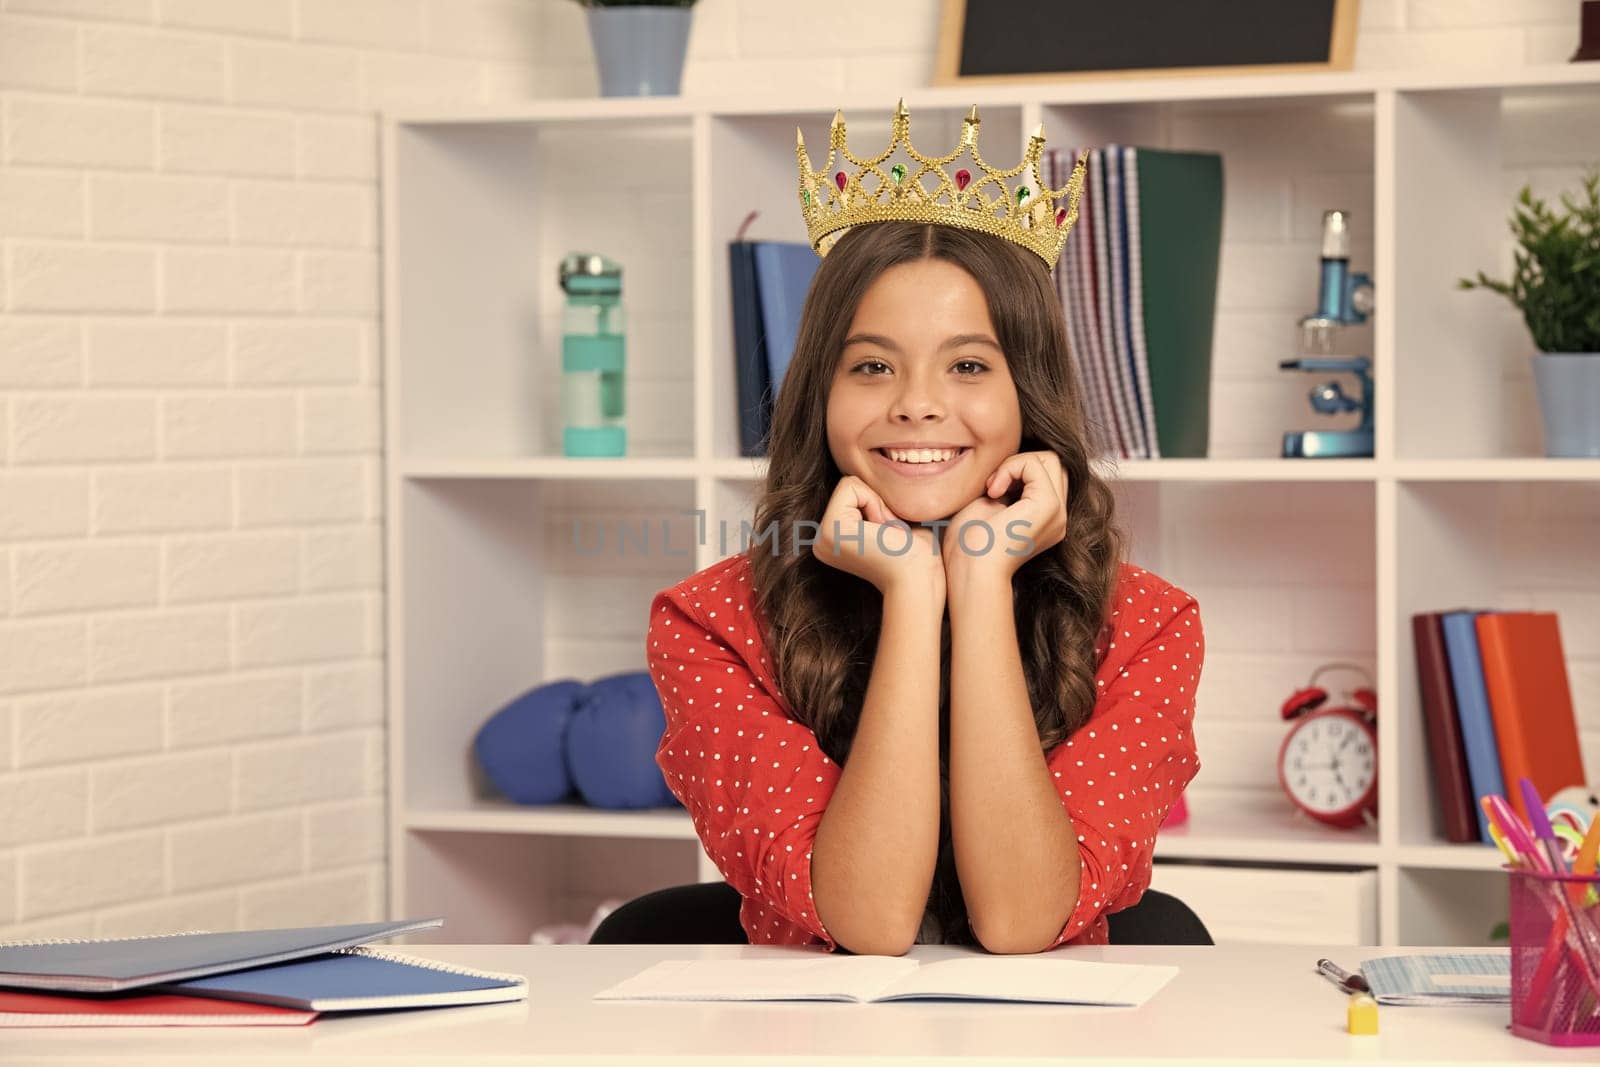 Princess school girl. Teenager princess child celebrates success win and victory. Teen girl in queen crown. Happy girl smiling. by RedFoxStudio